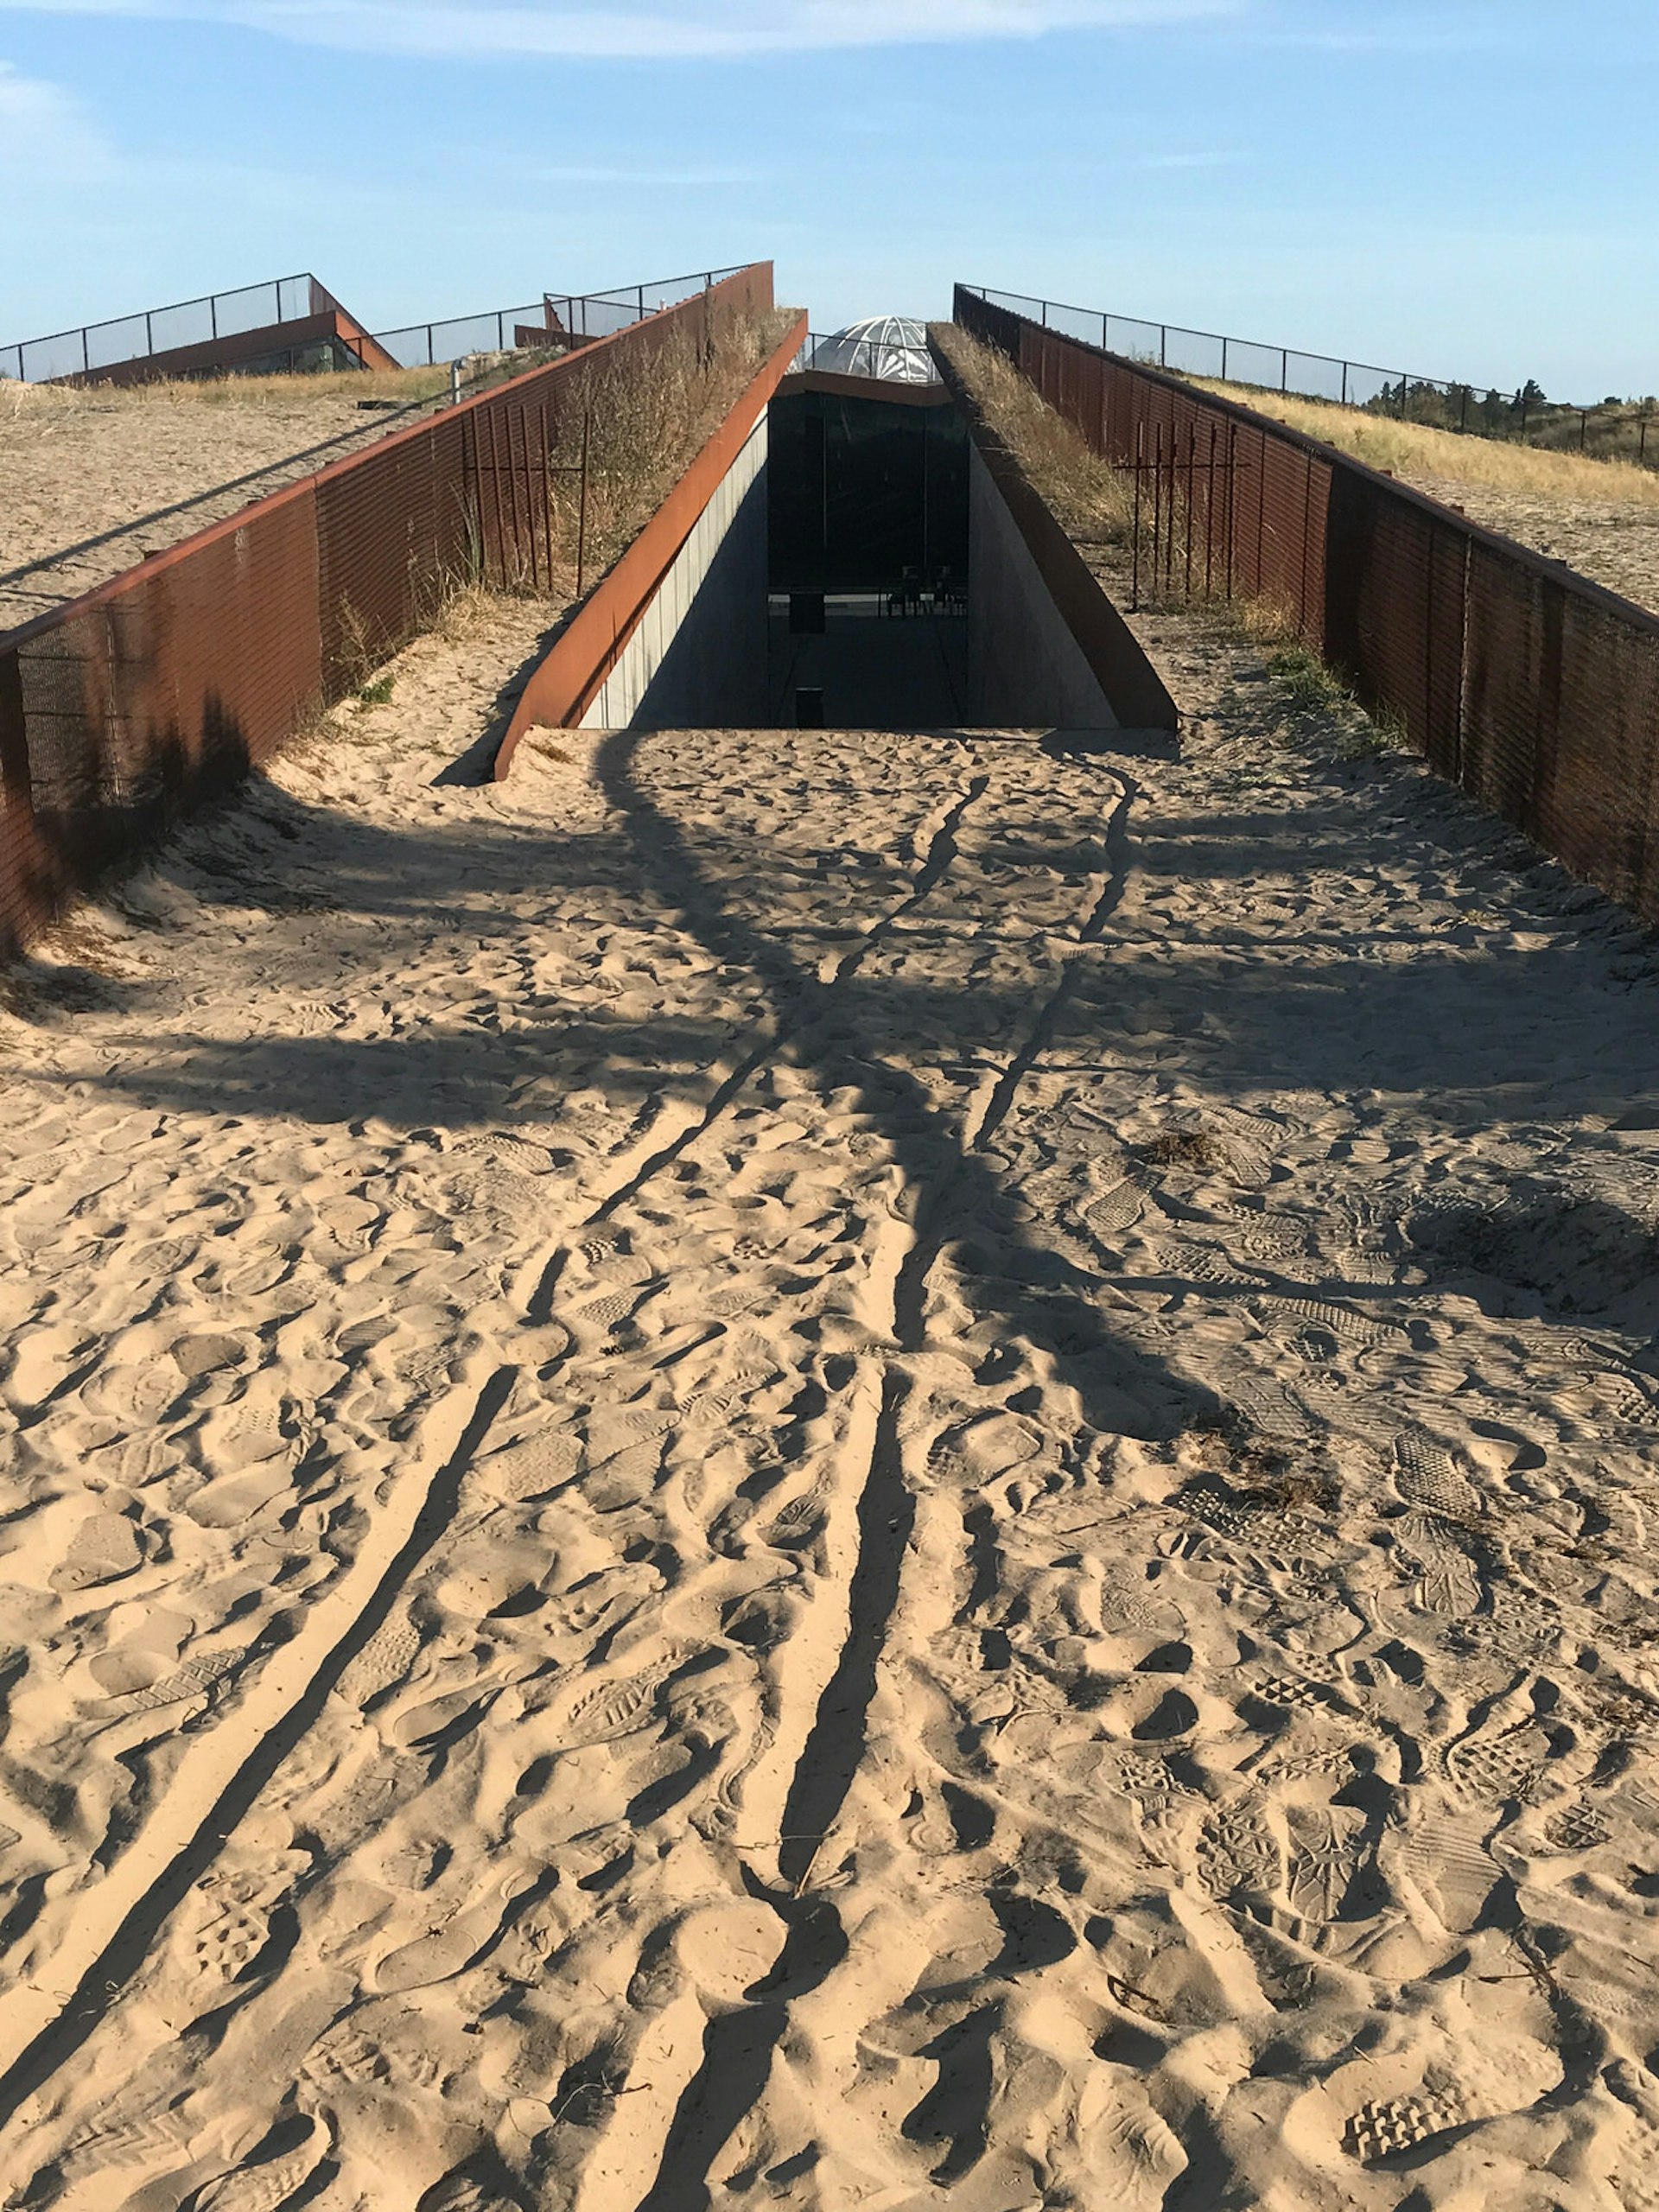 A sandy walkway leading to the underground entrance at the Tirpitz Bunker Museum © Abigail Blasi / Lonely Planet